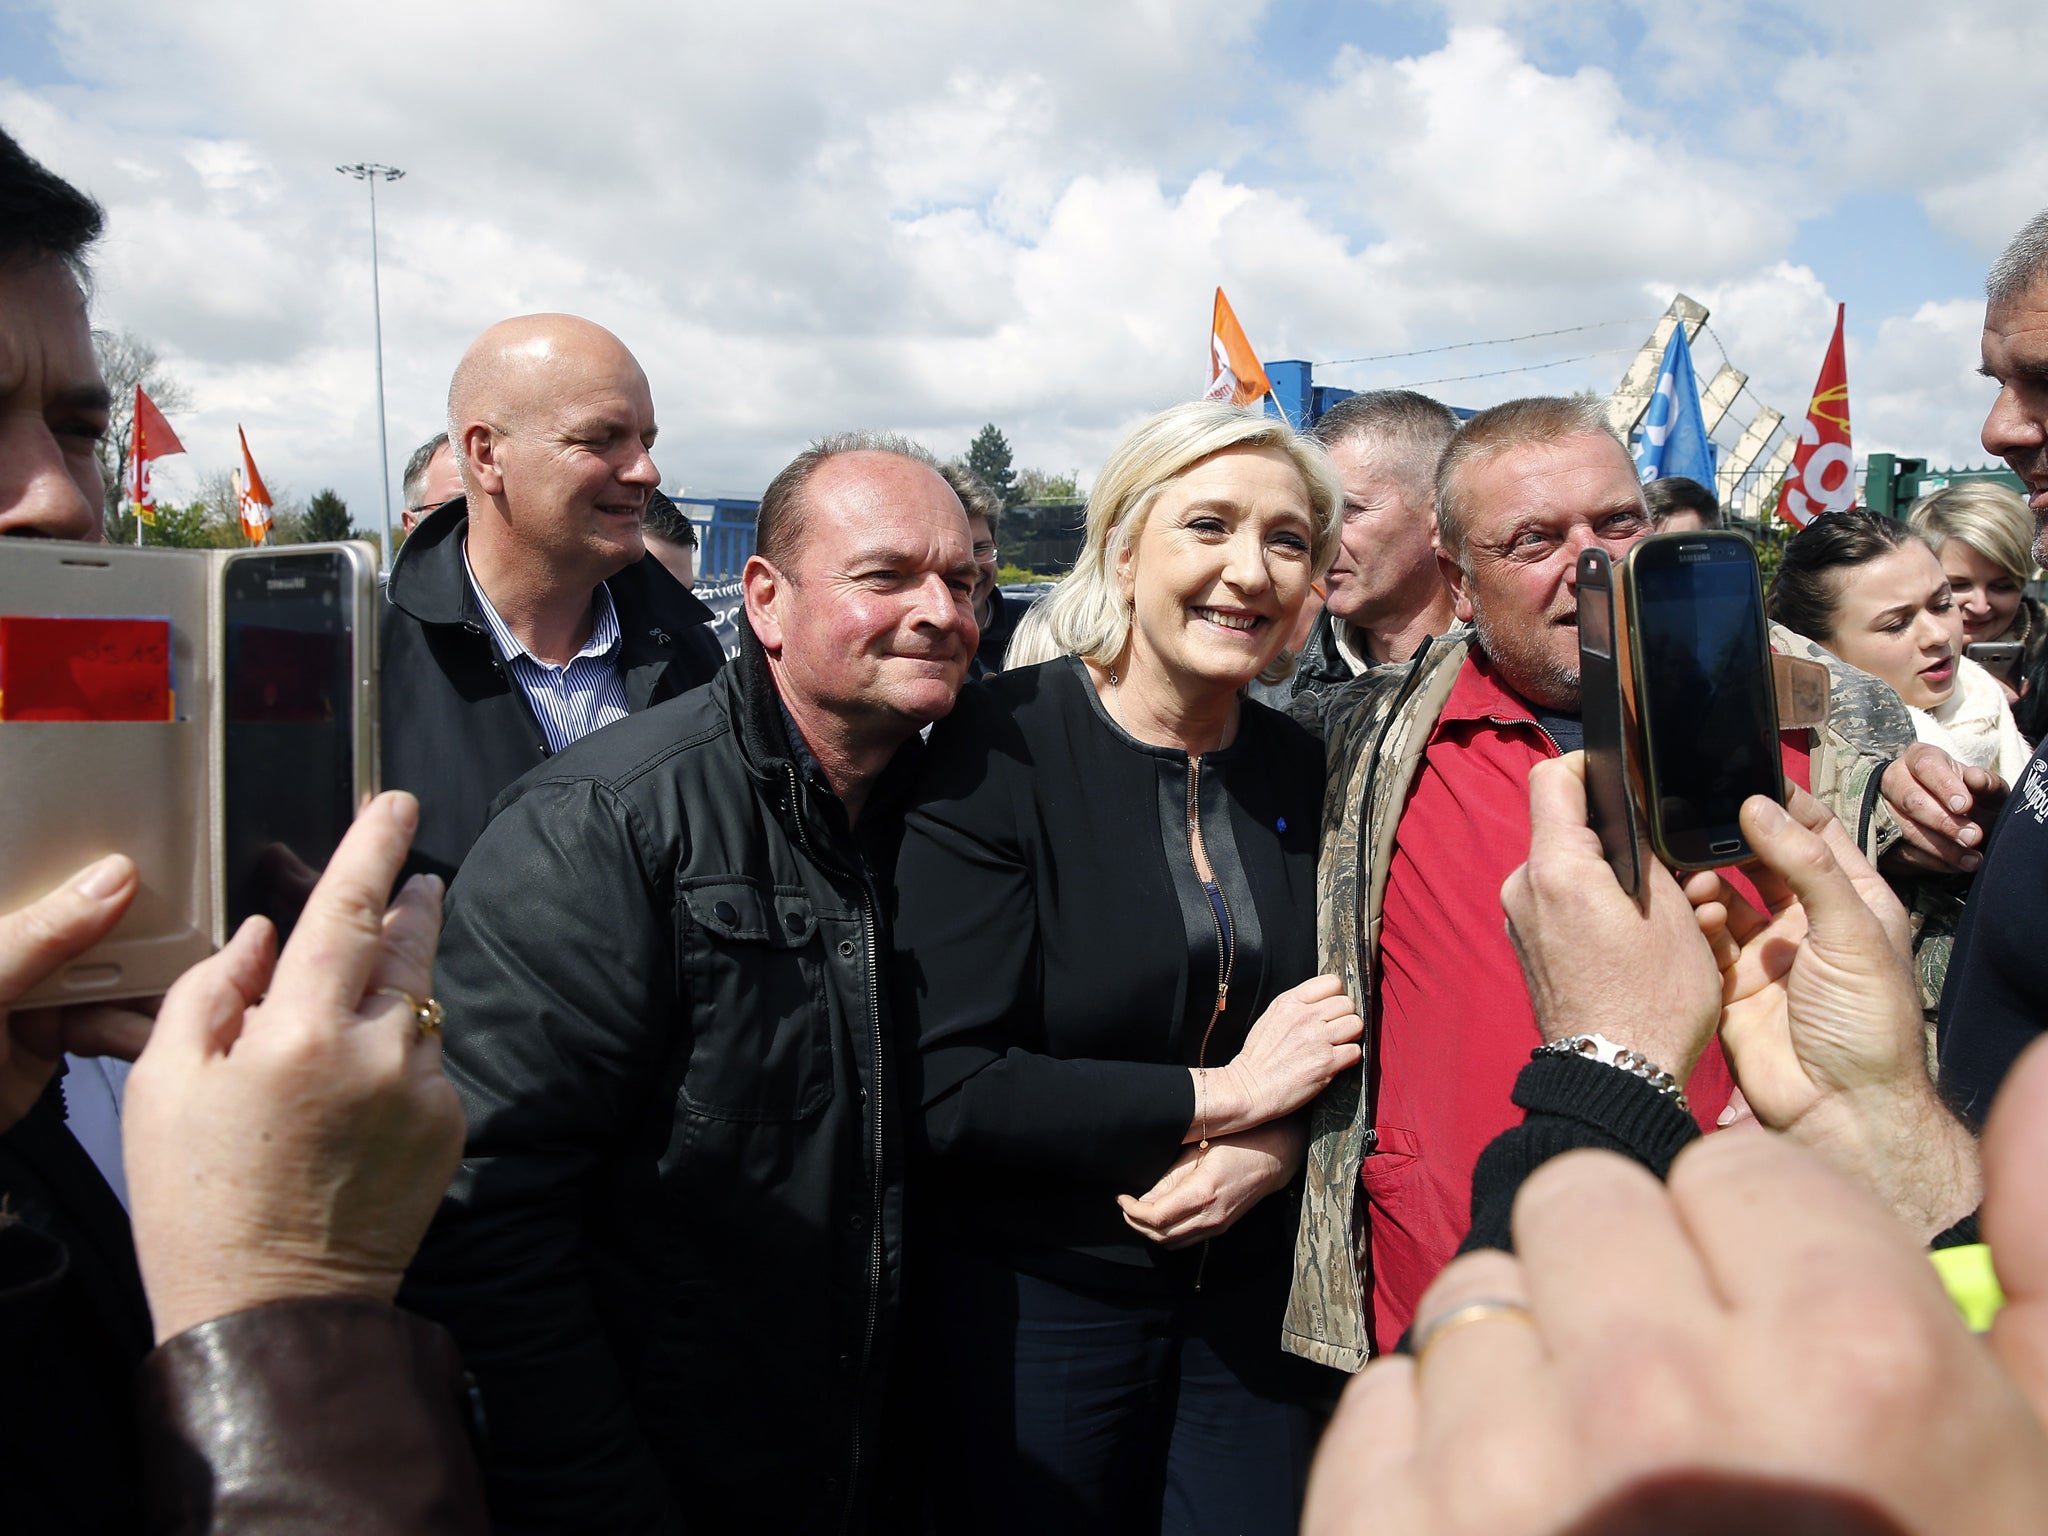 French far-right political party National Front (FN) and President French presidential election candidate, Marine Le Pen poses for selfies with strike employees of Whirlpool, in Amiens, France